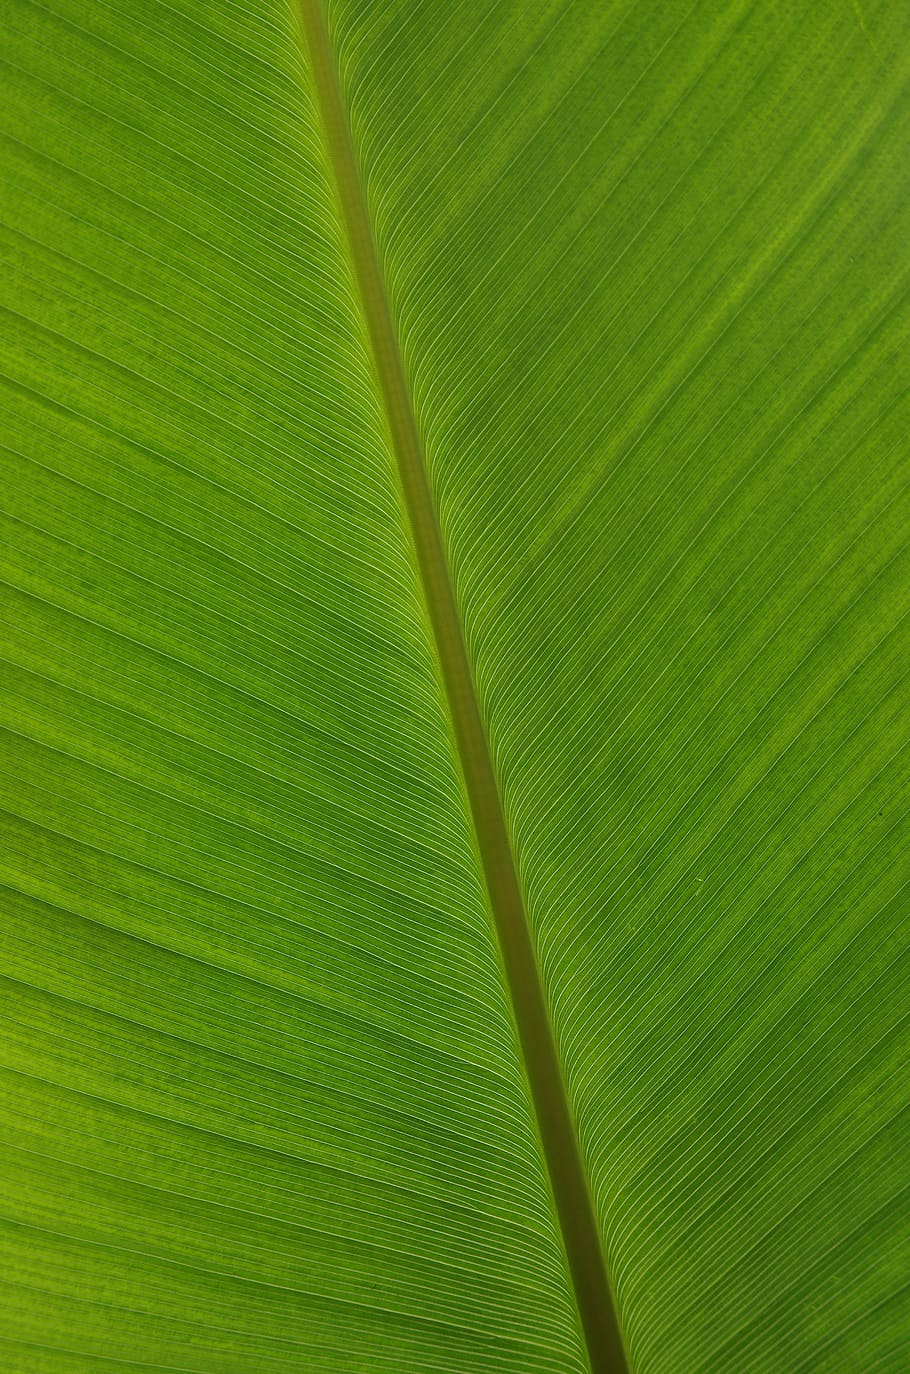 green, leaf, nature, plant, pattern, texture, eco, plant part, green color, close-up